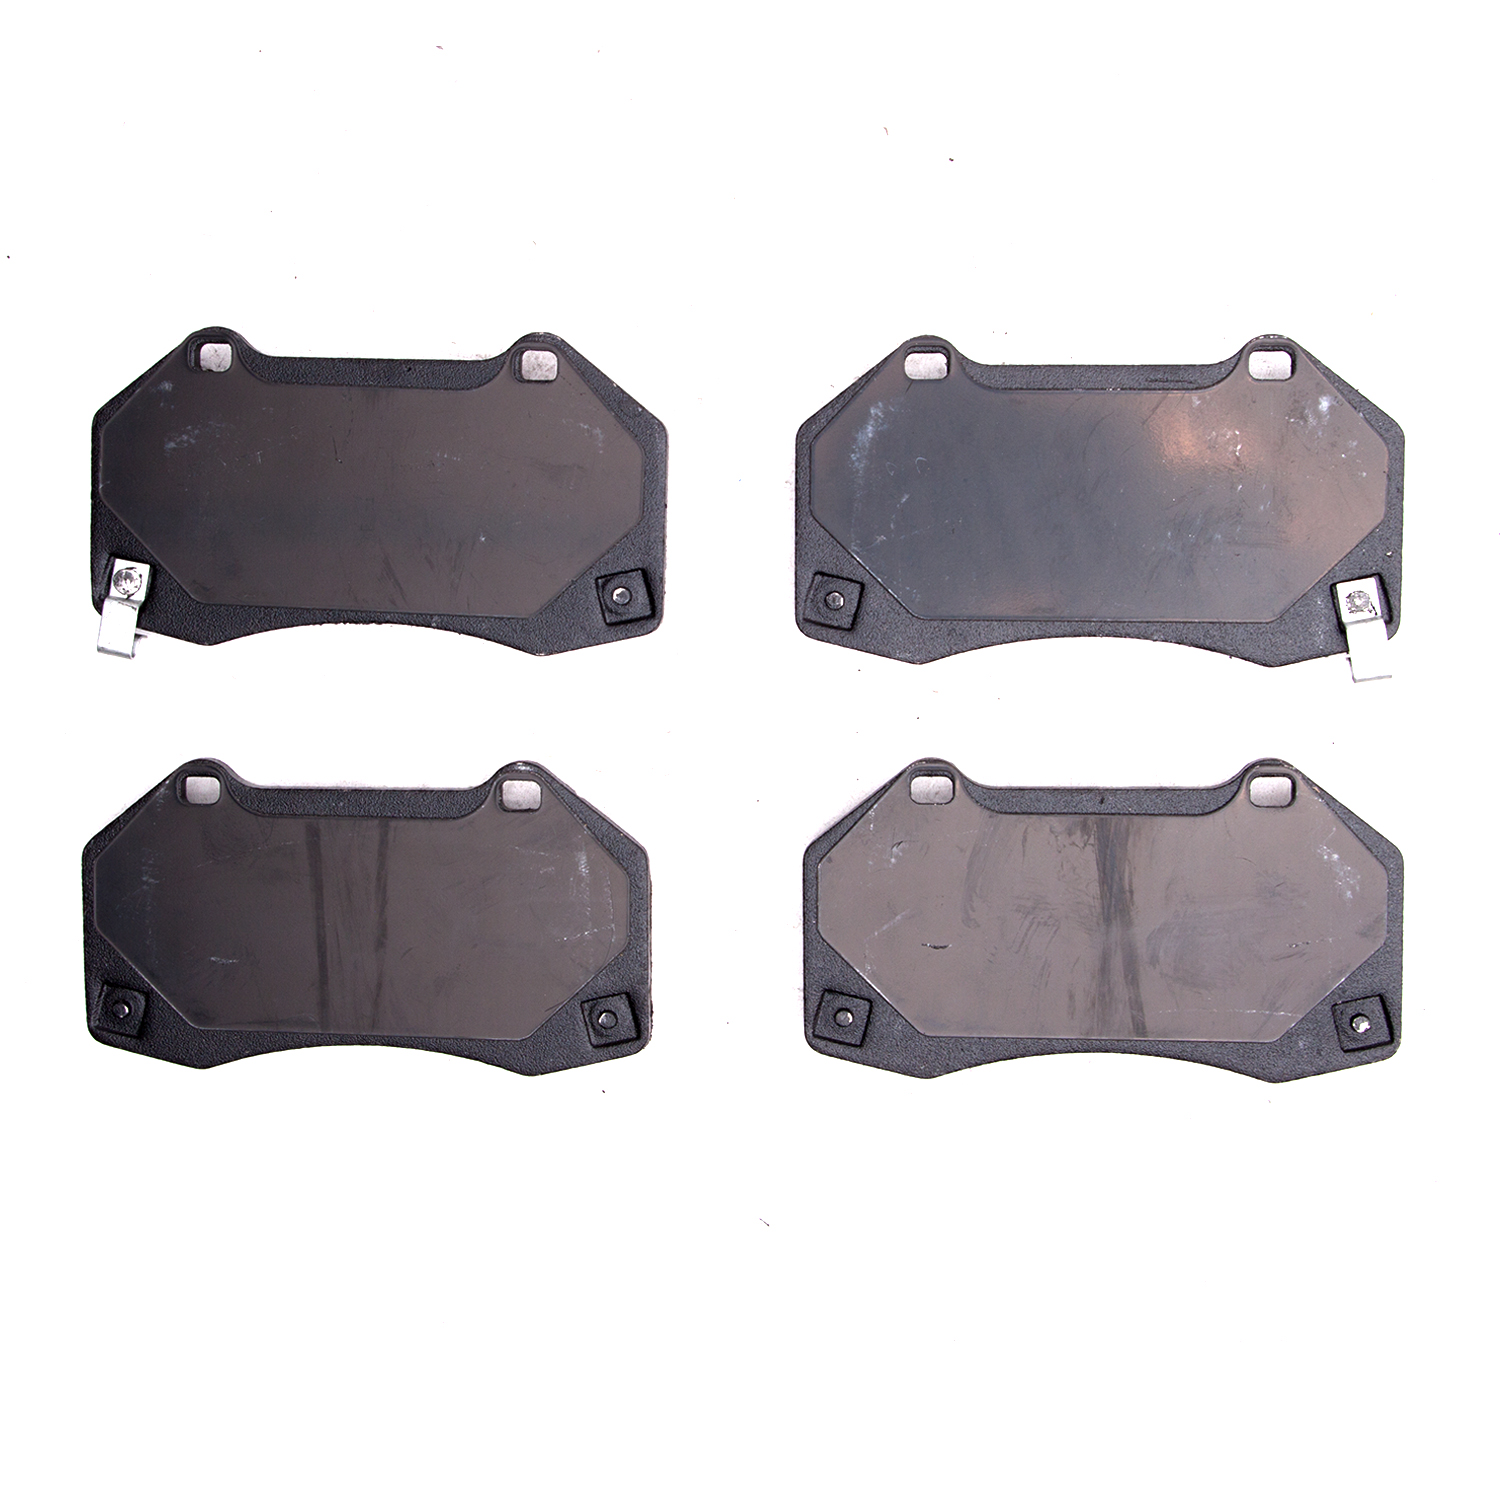 Performance Sport Brake Pads, Fits Select Fits Multiple Makes/Models, Position: Front